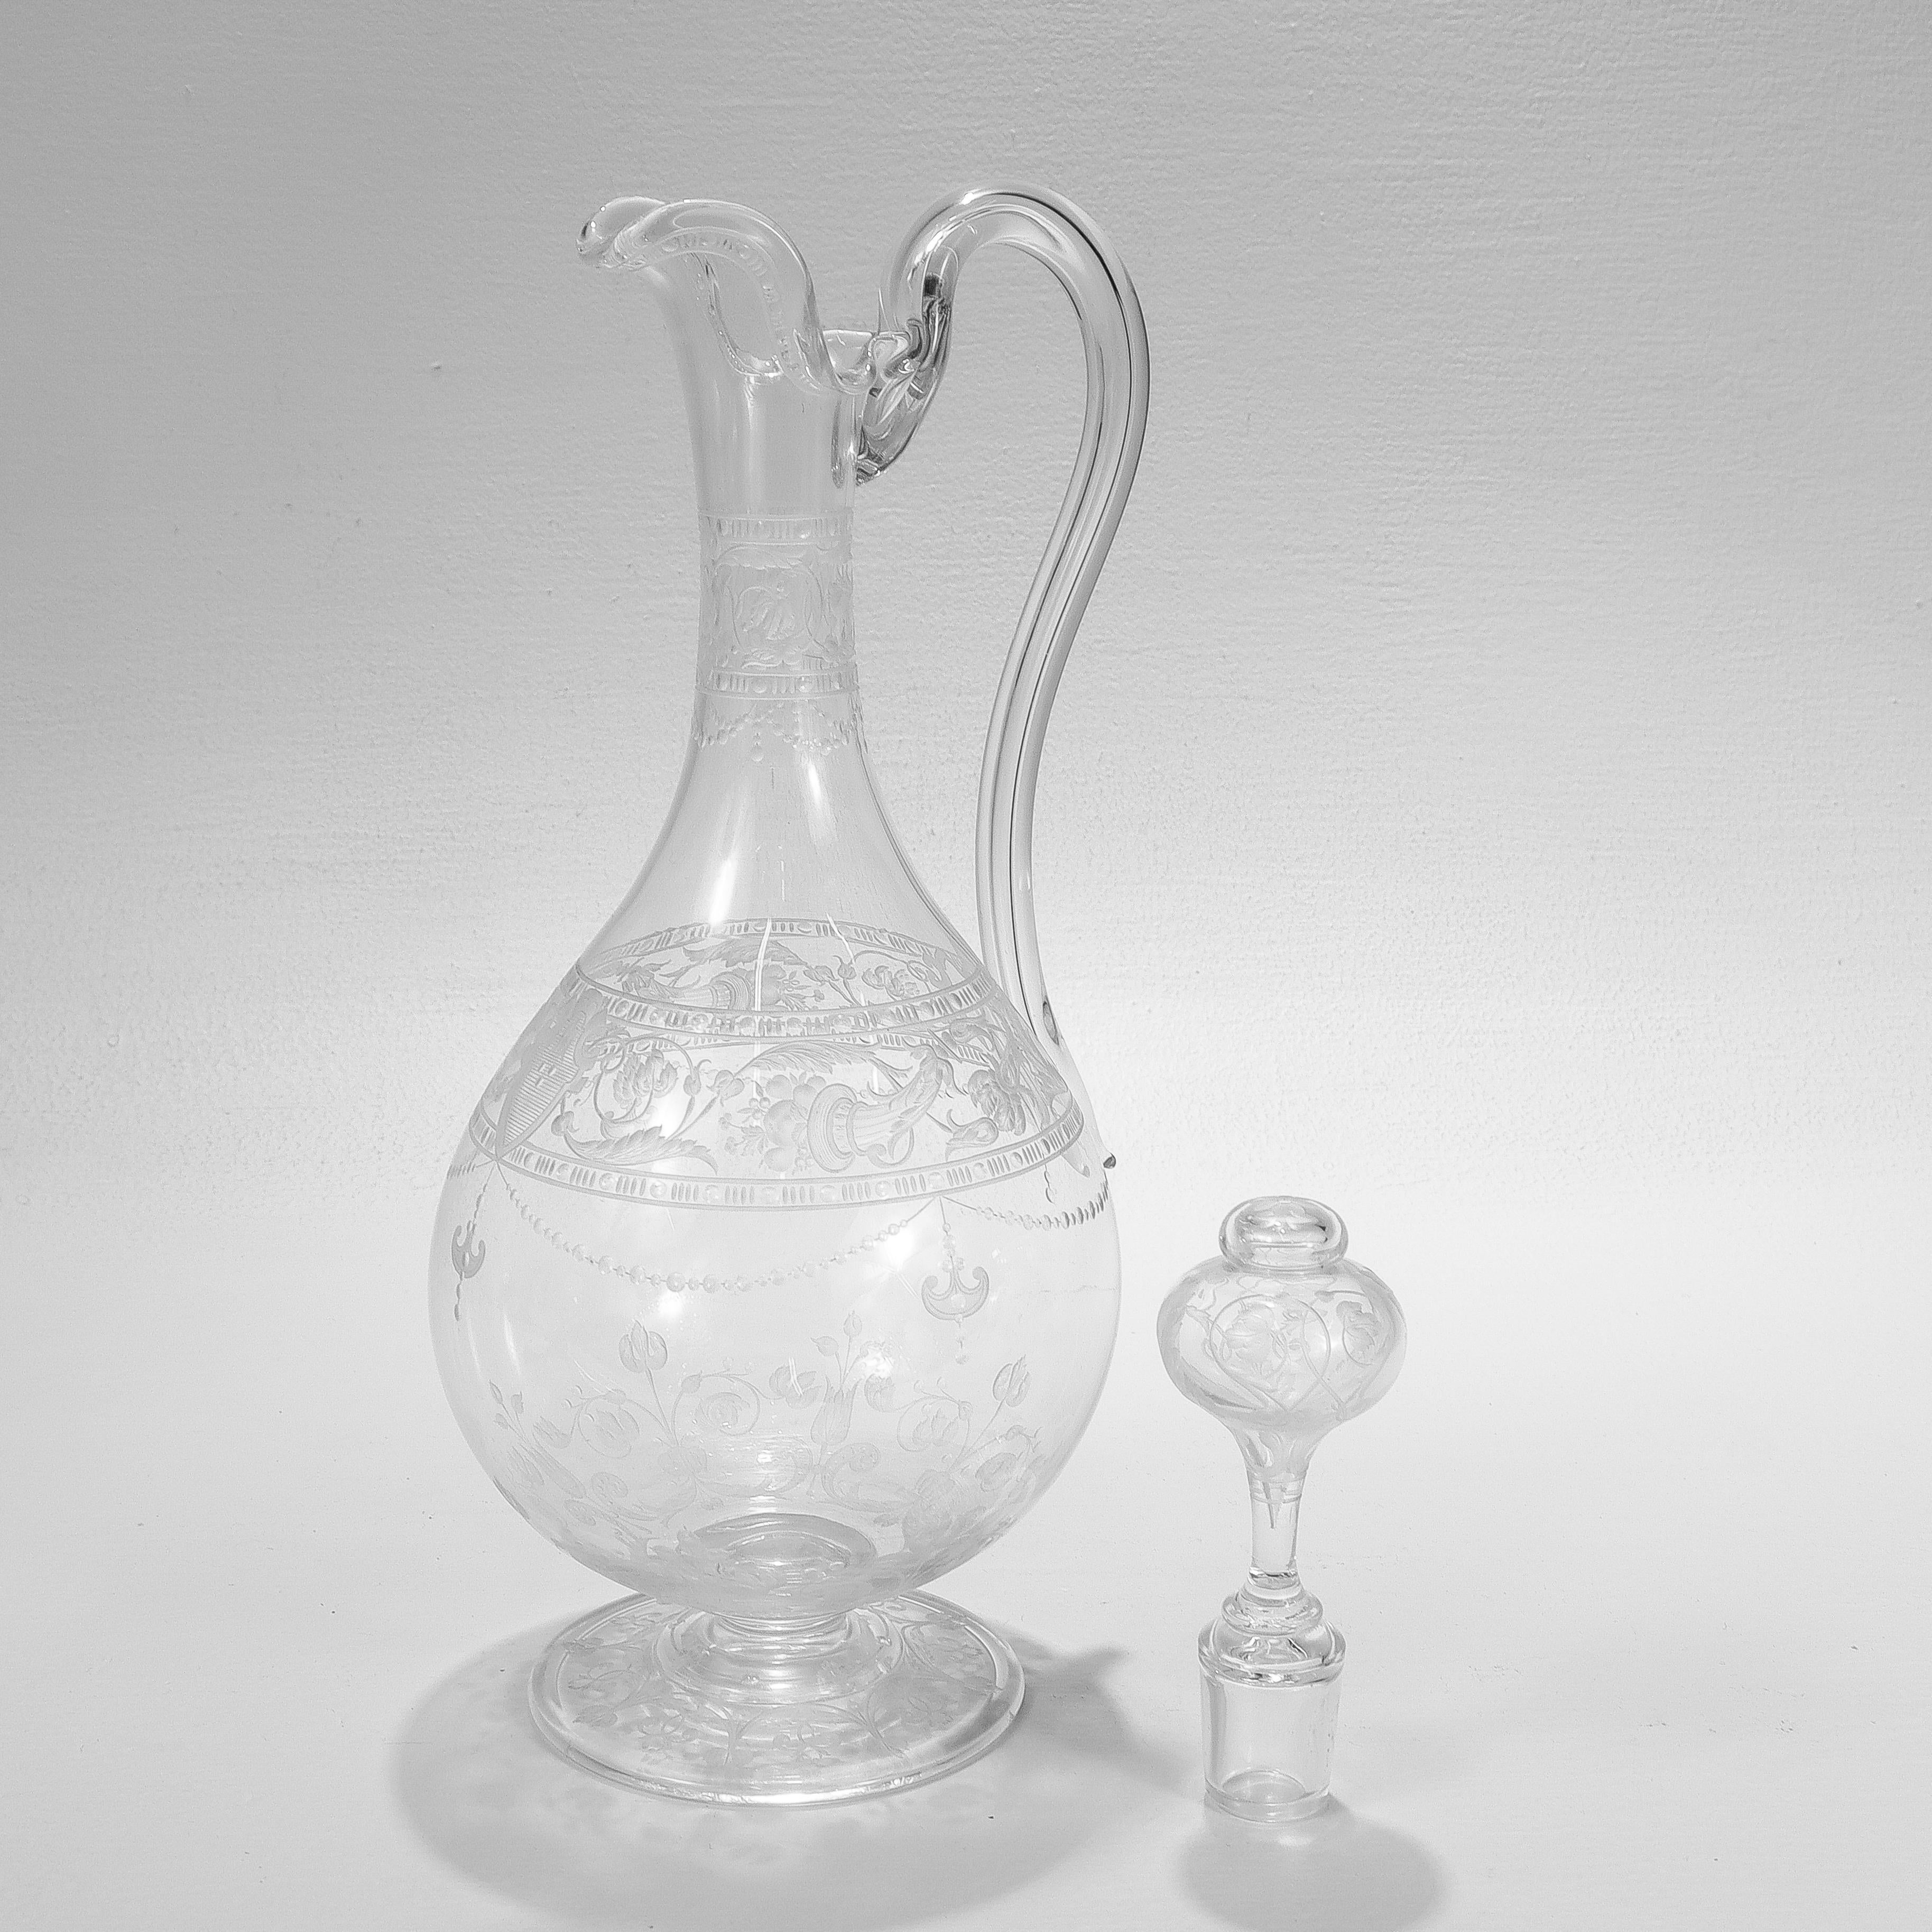 A fine antique English etched and engraved glass handled decanter.

Attributed to Stevens & Williams or Webb.

With engraved & etched designs trelliswork, flowers, and shield devices.

With a shaped rim, curved handle, and a stopper with cut leaf